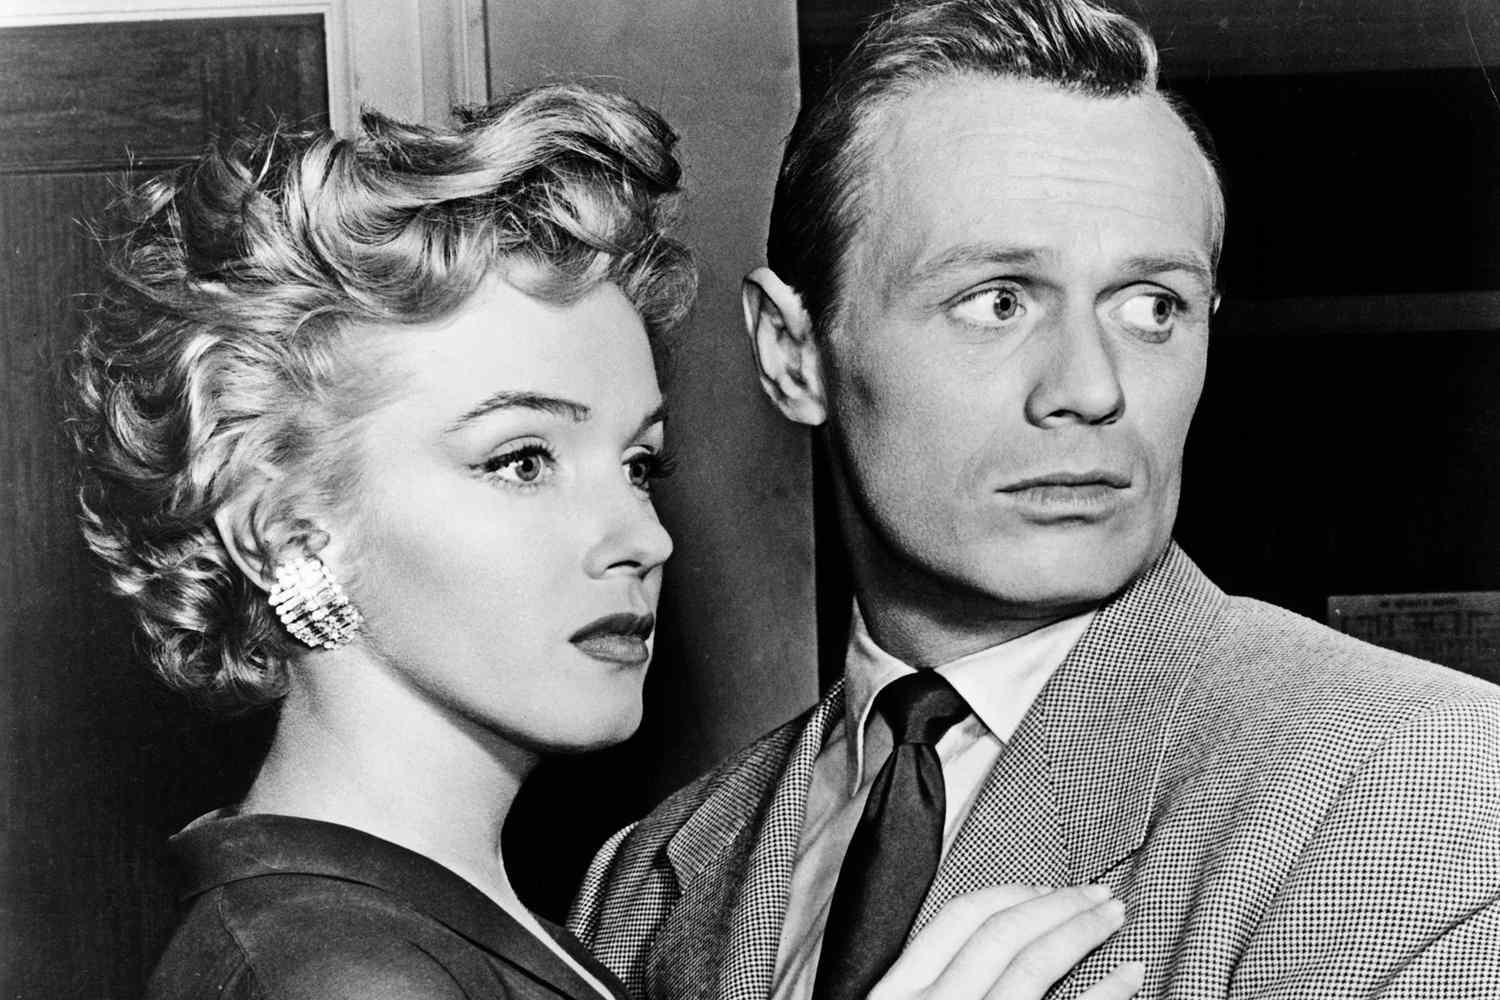 Marilyn Monroe and Richard Widmark embracing in a scene from the film 'Don't Bother To Knock', 1952. (Photo by 20th Century-Fox/Getty Images)